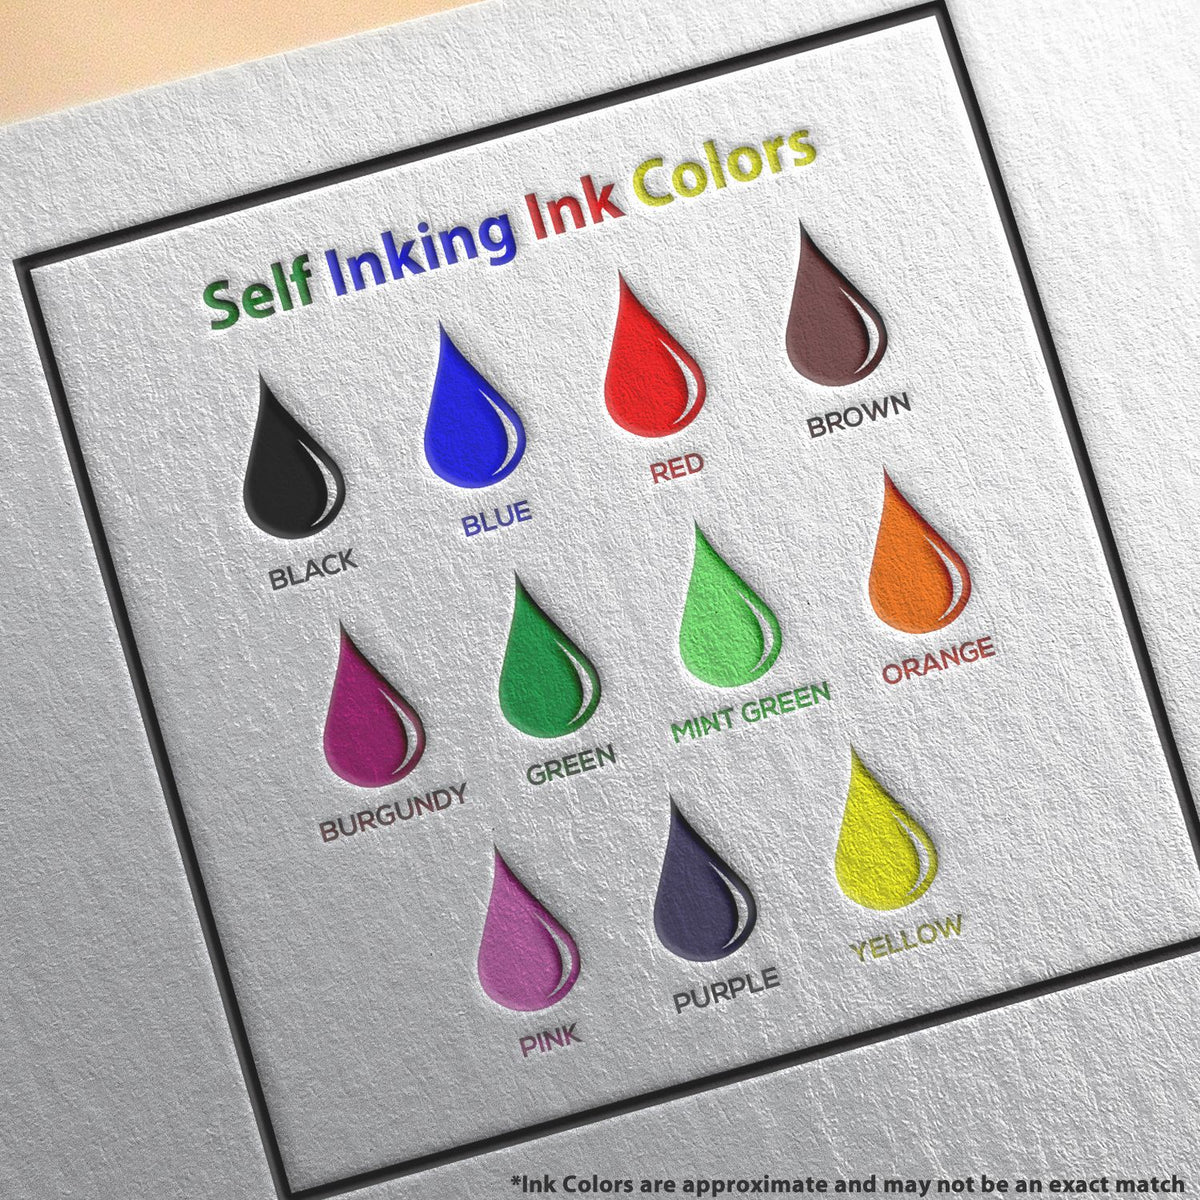 A picture showing the different ink colors or hues available for the Heavy-Duty California Rectangular Notary Stamp product.